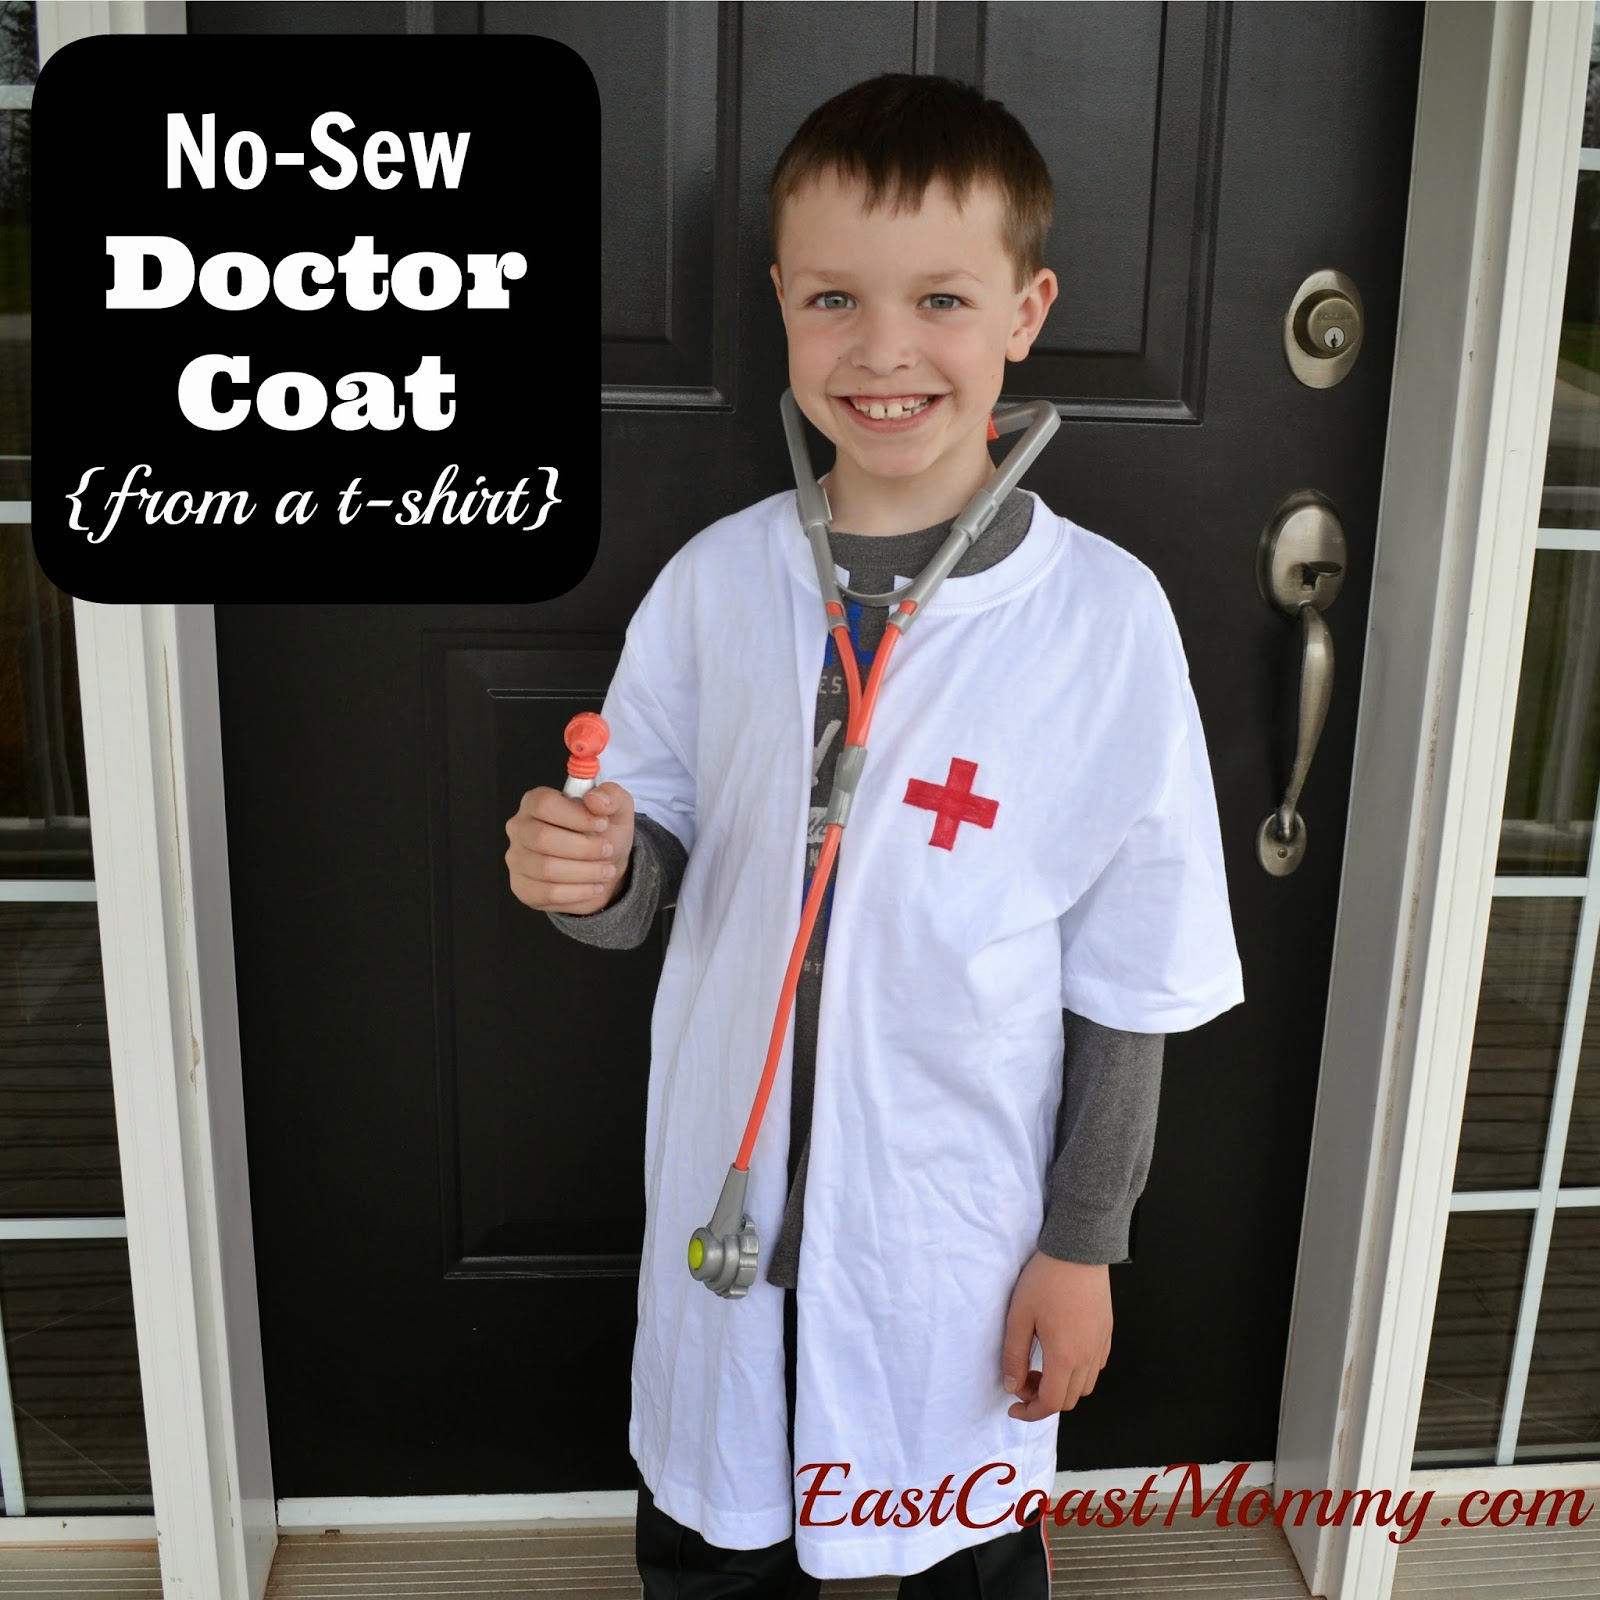 Kids Lab Coat Scientist Doctors Dress up Role Play Costume Set for Career Day